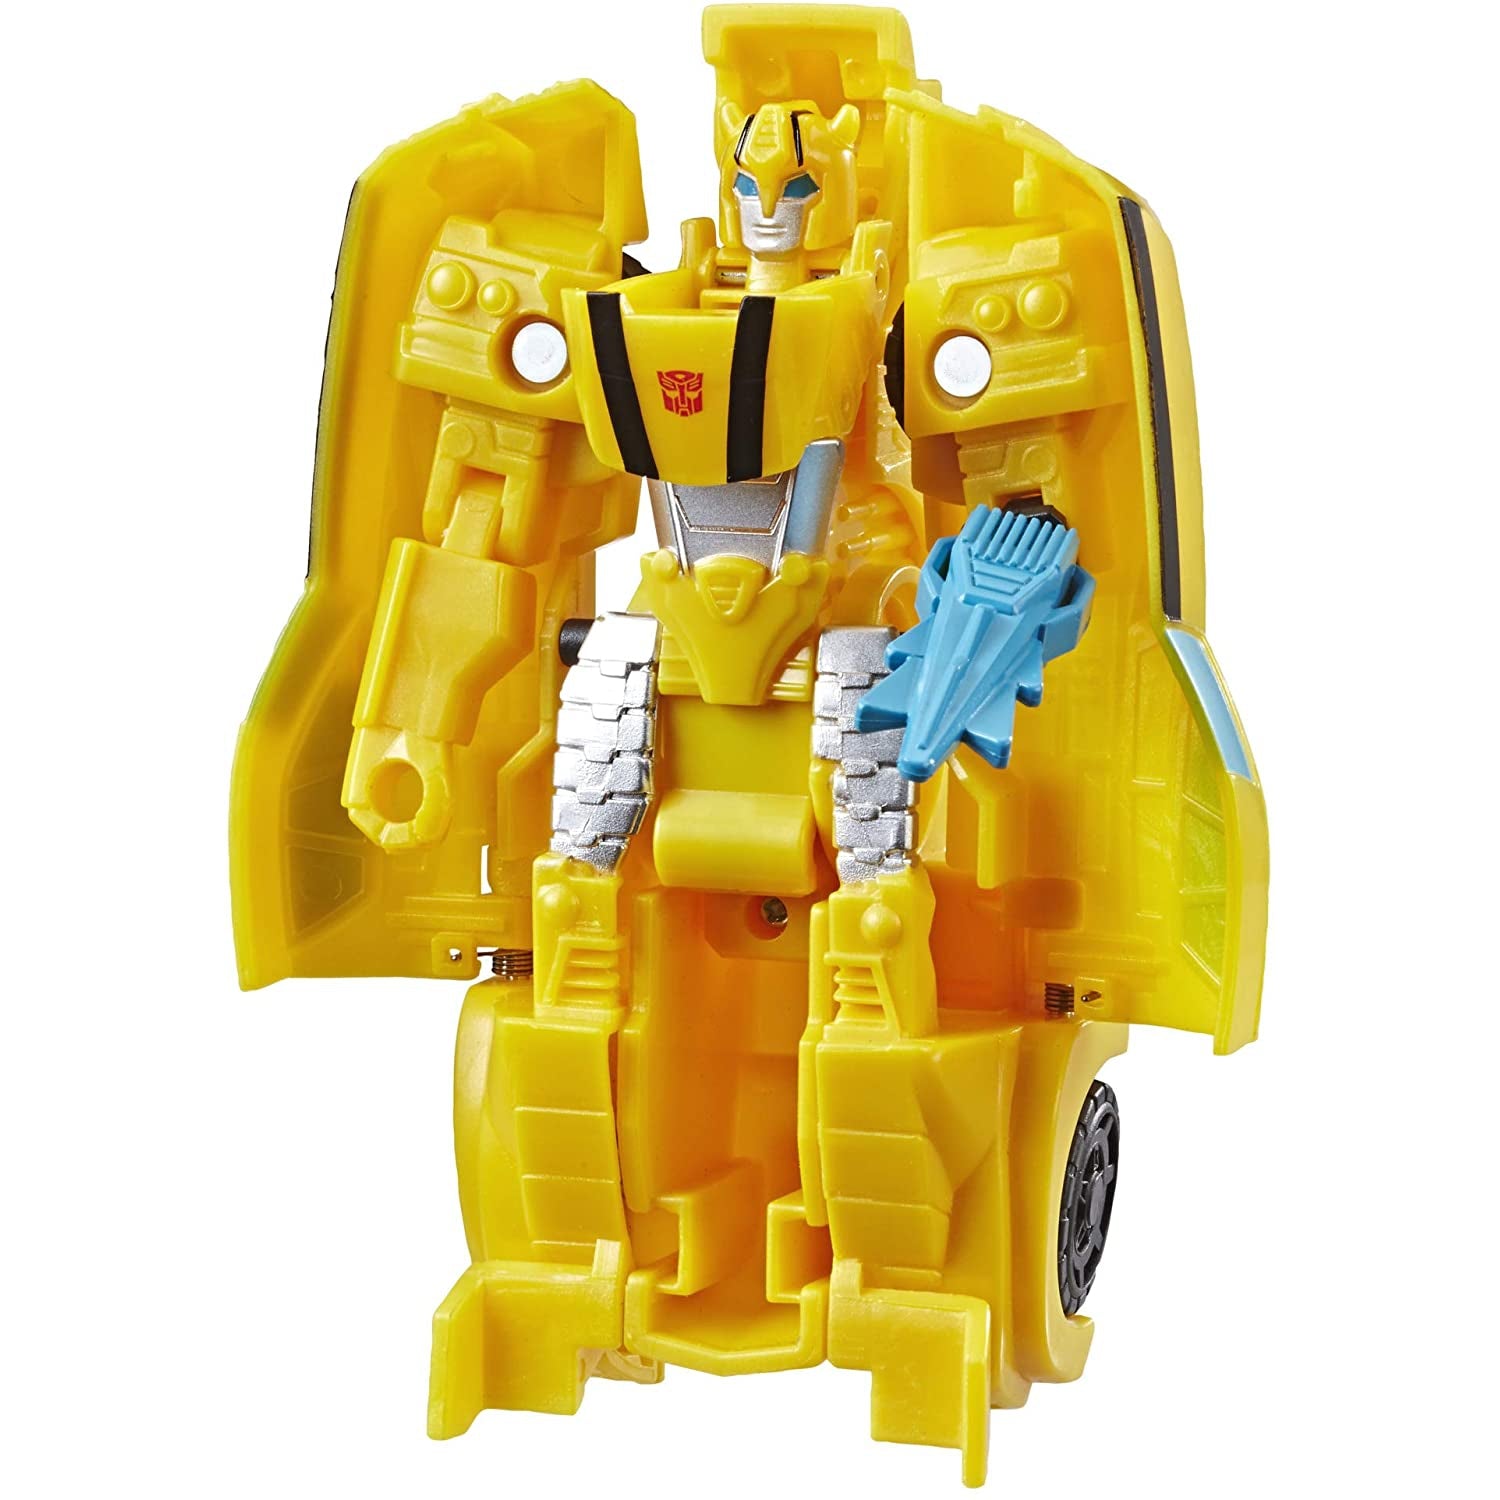 Transformers Cyberverse Action Attackers Bumblebee Action Figure